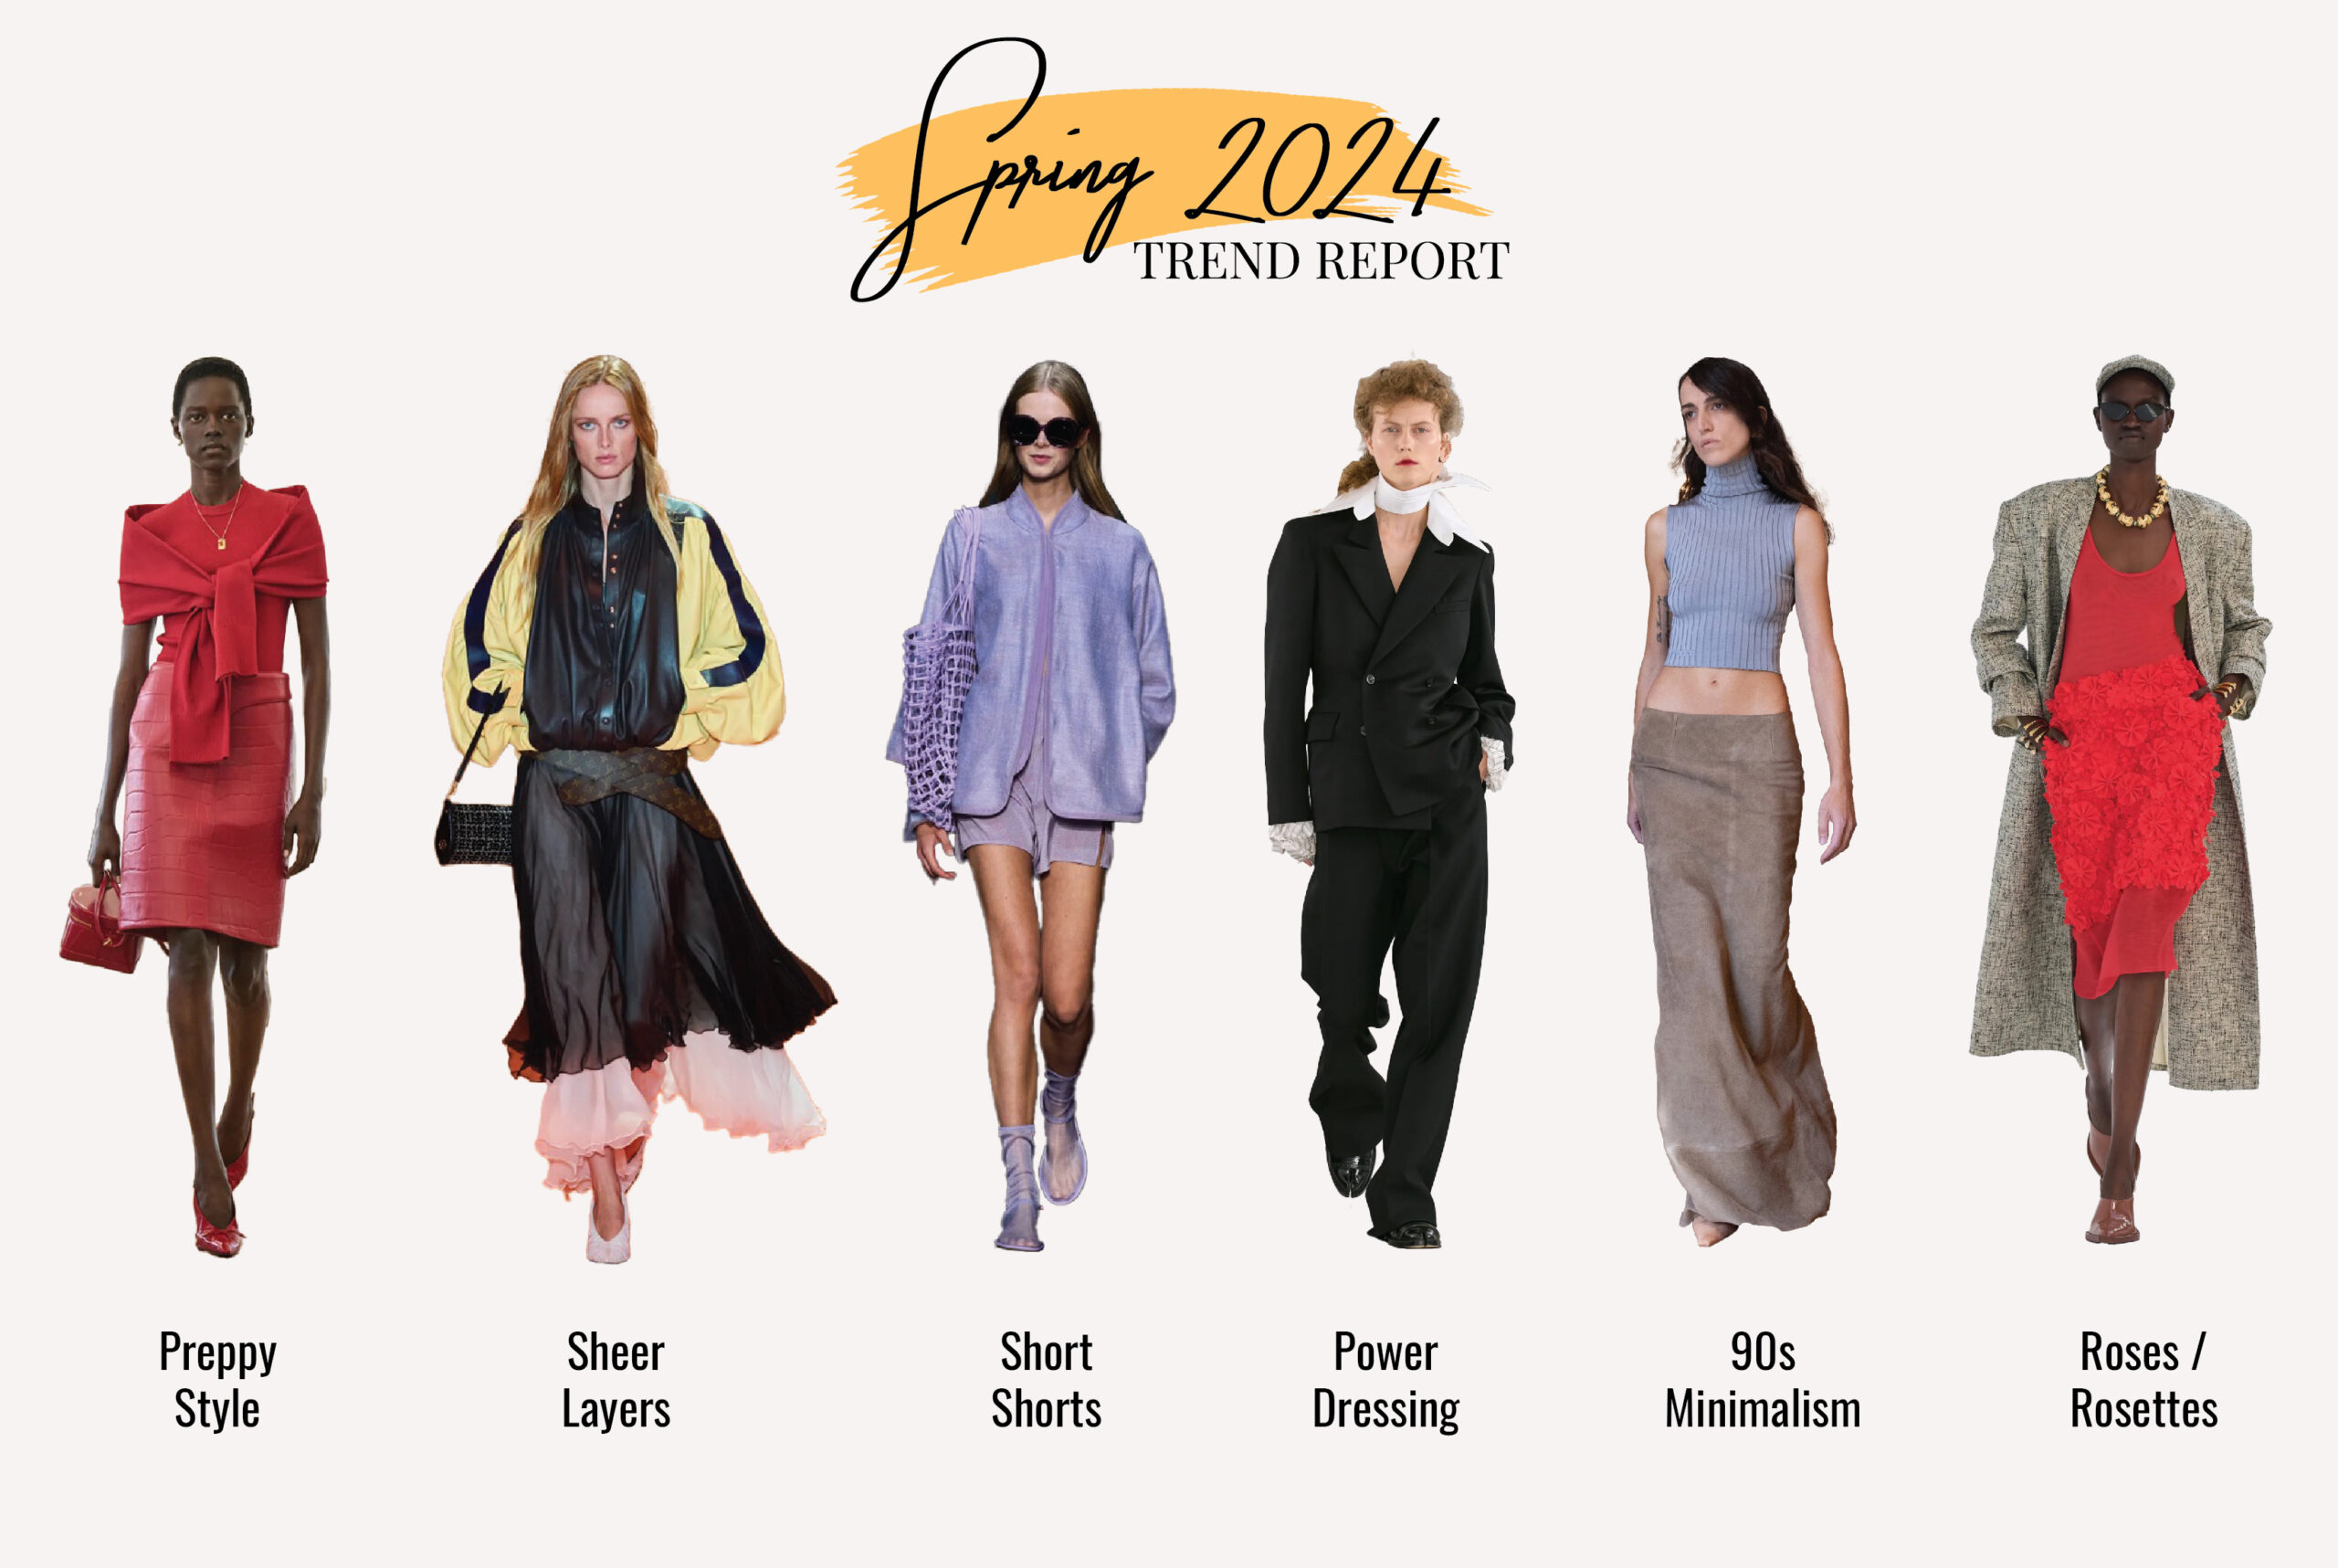 Six runway model images, each displaying a different trend.